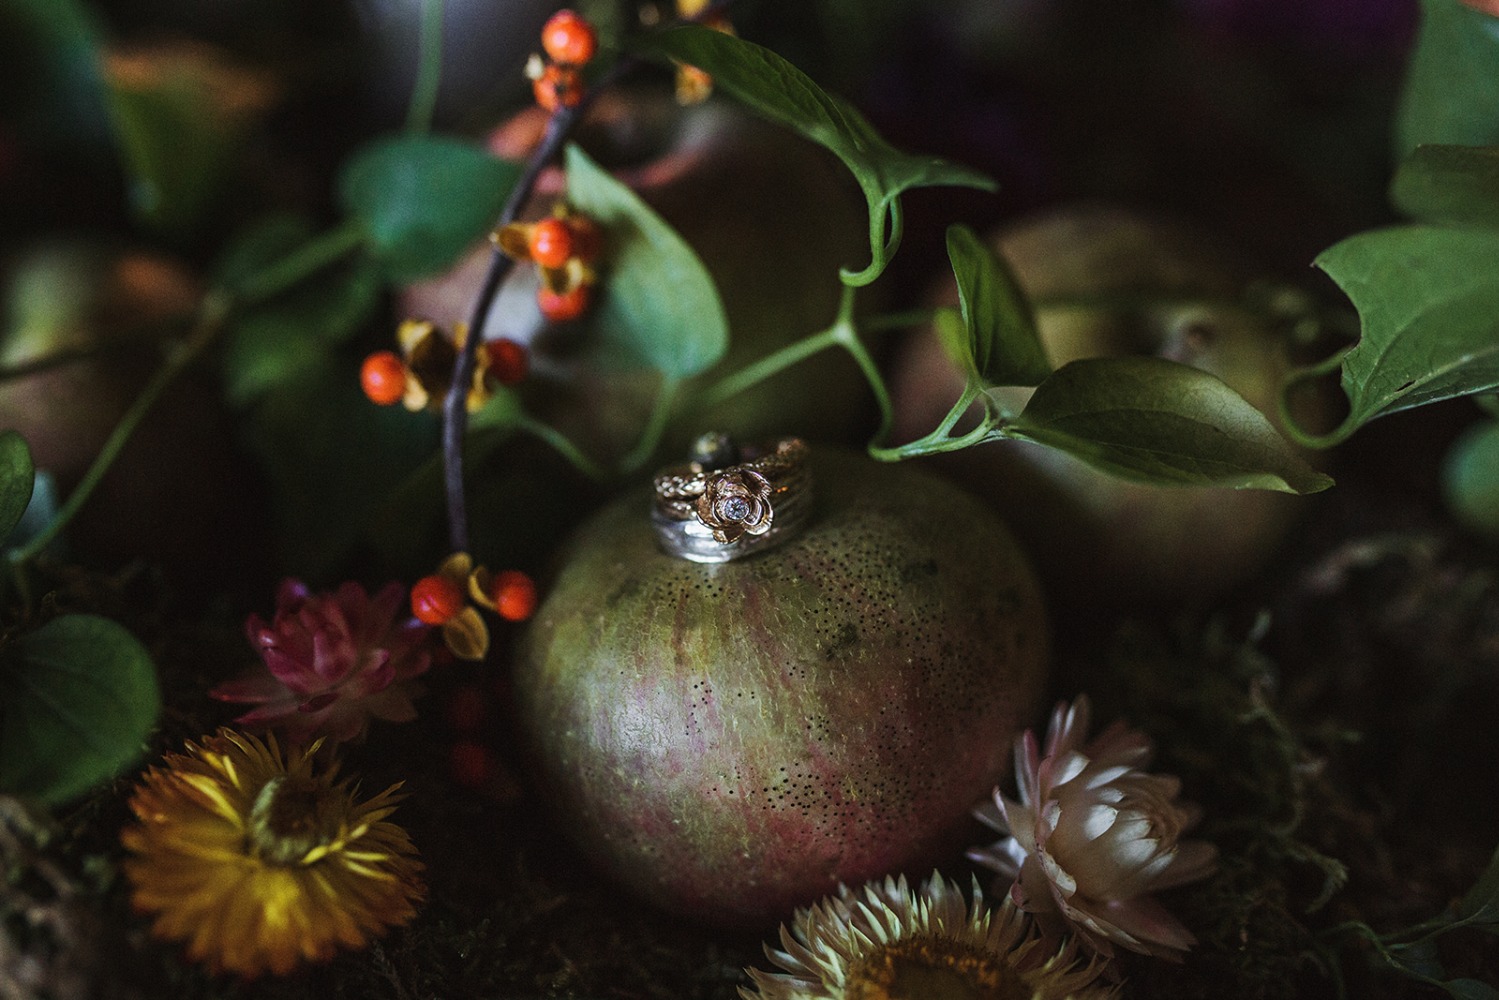 wedding rings on a pomegranate